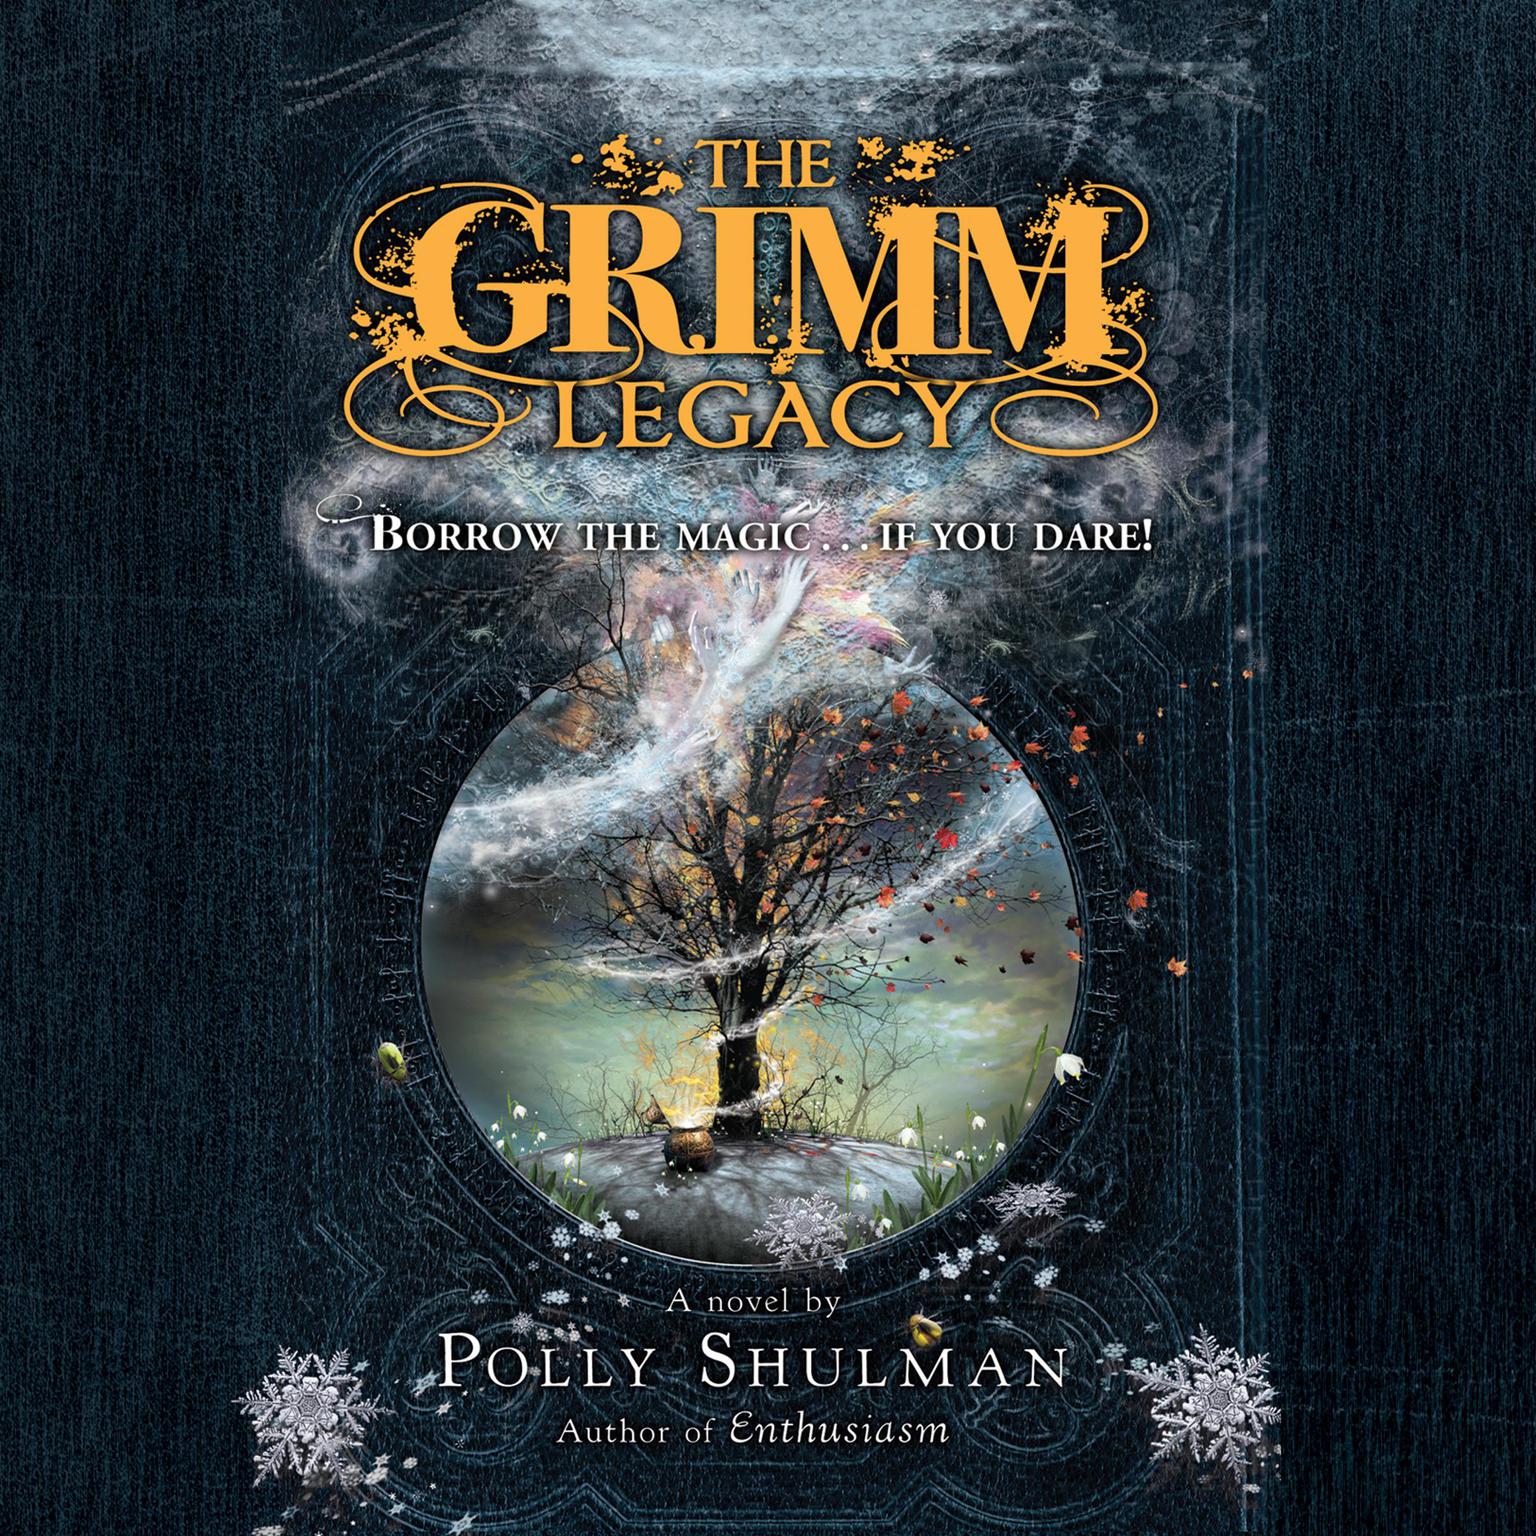 The Grimm Legacy Audiobook, by Polly Shulman